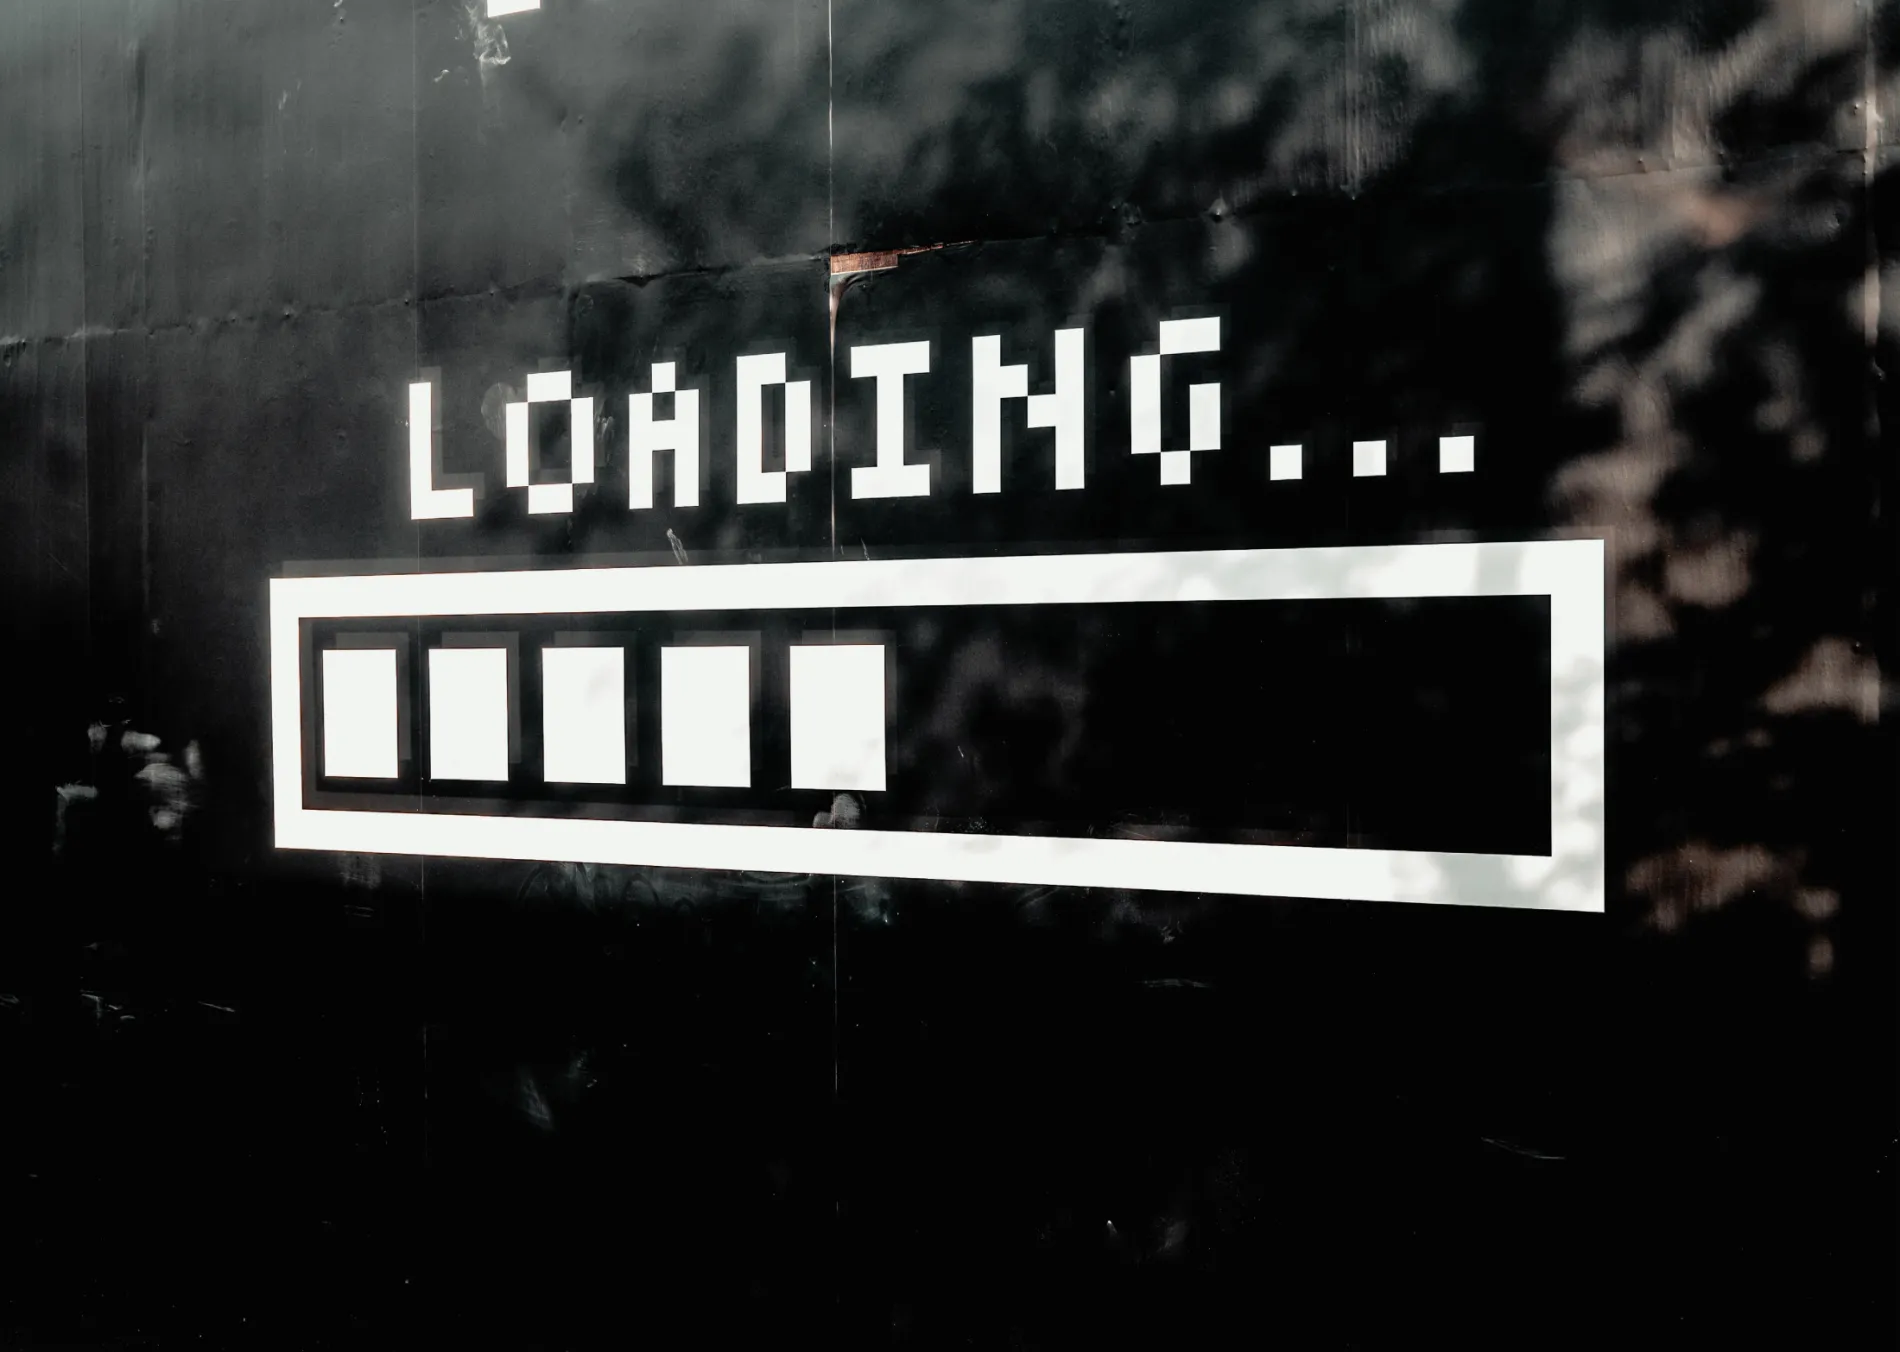 A dark background with a "loading" graphic